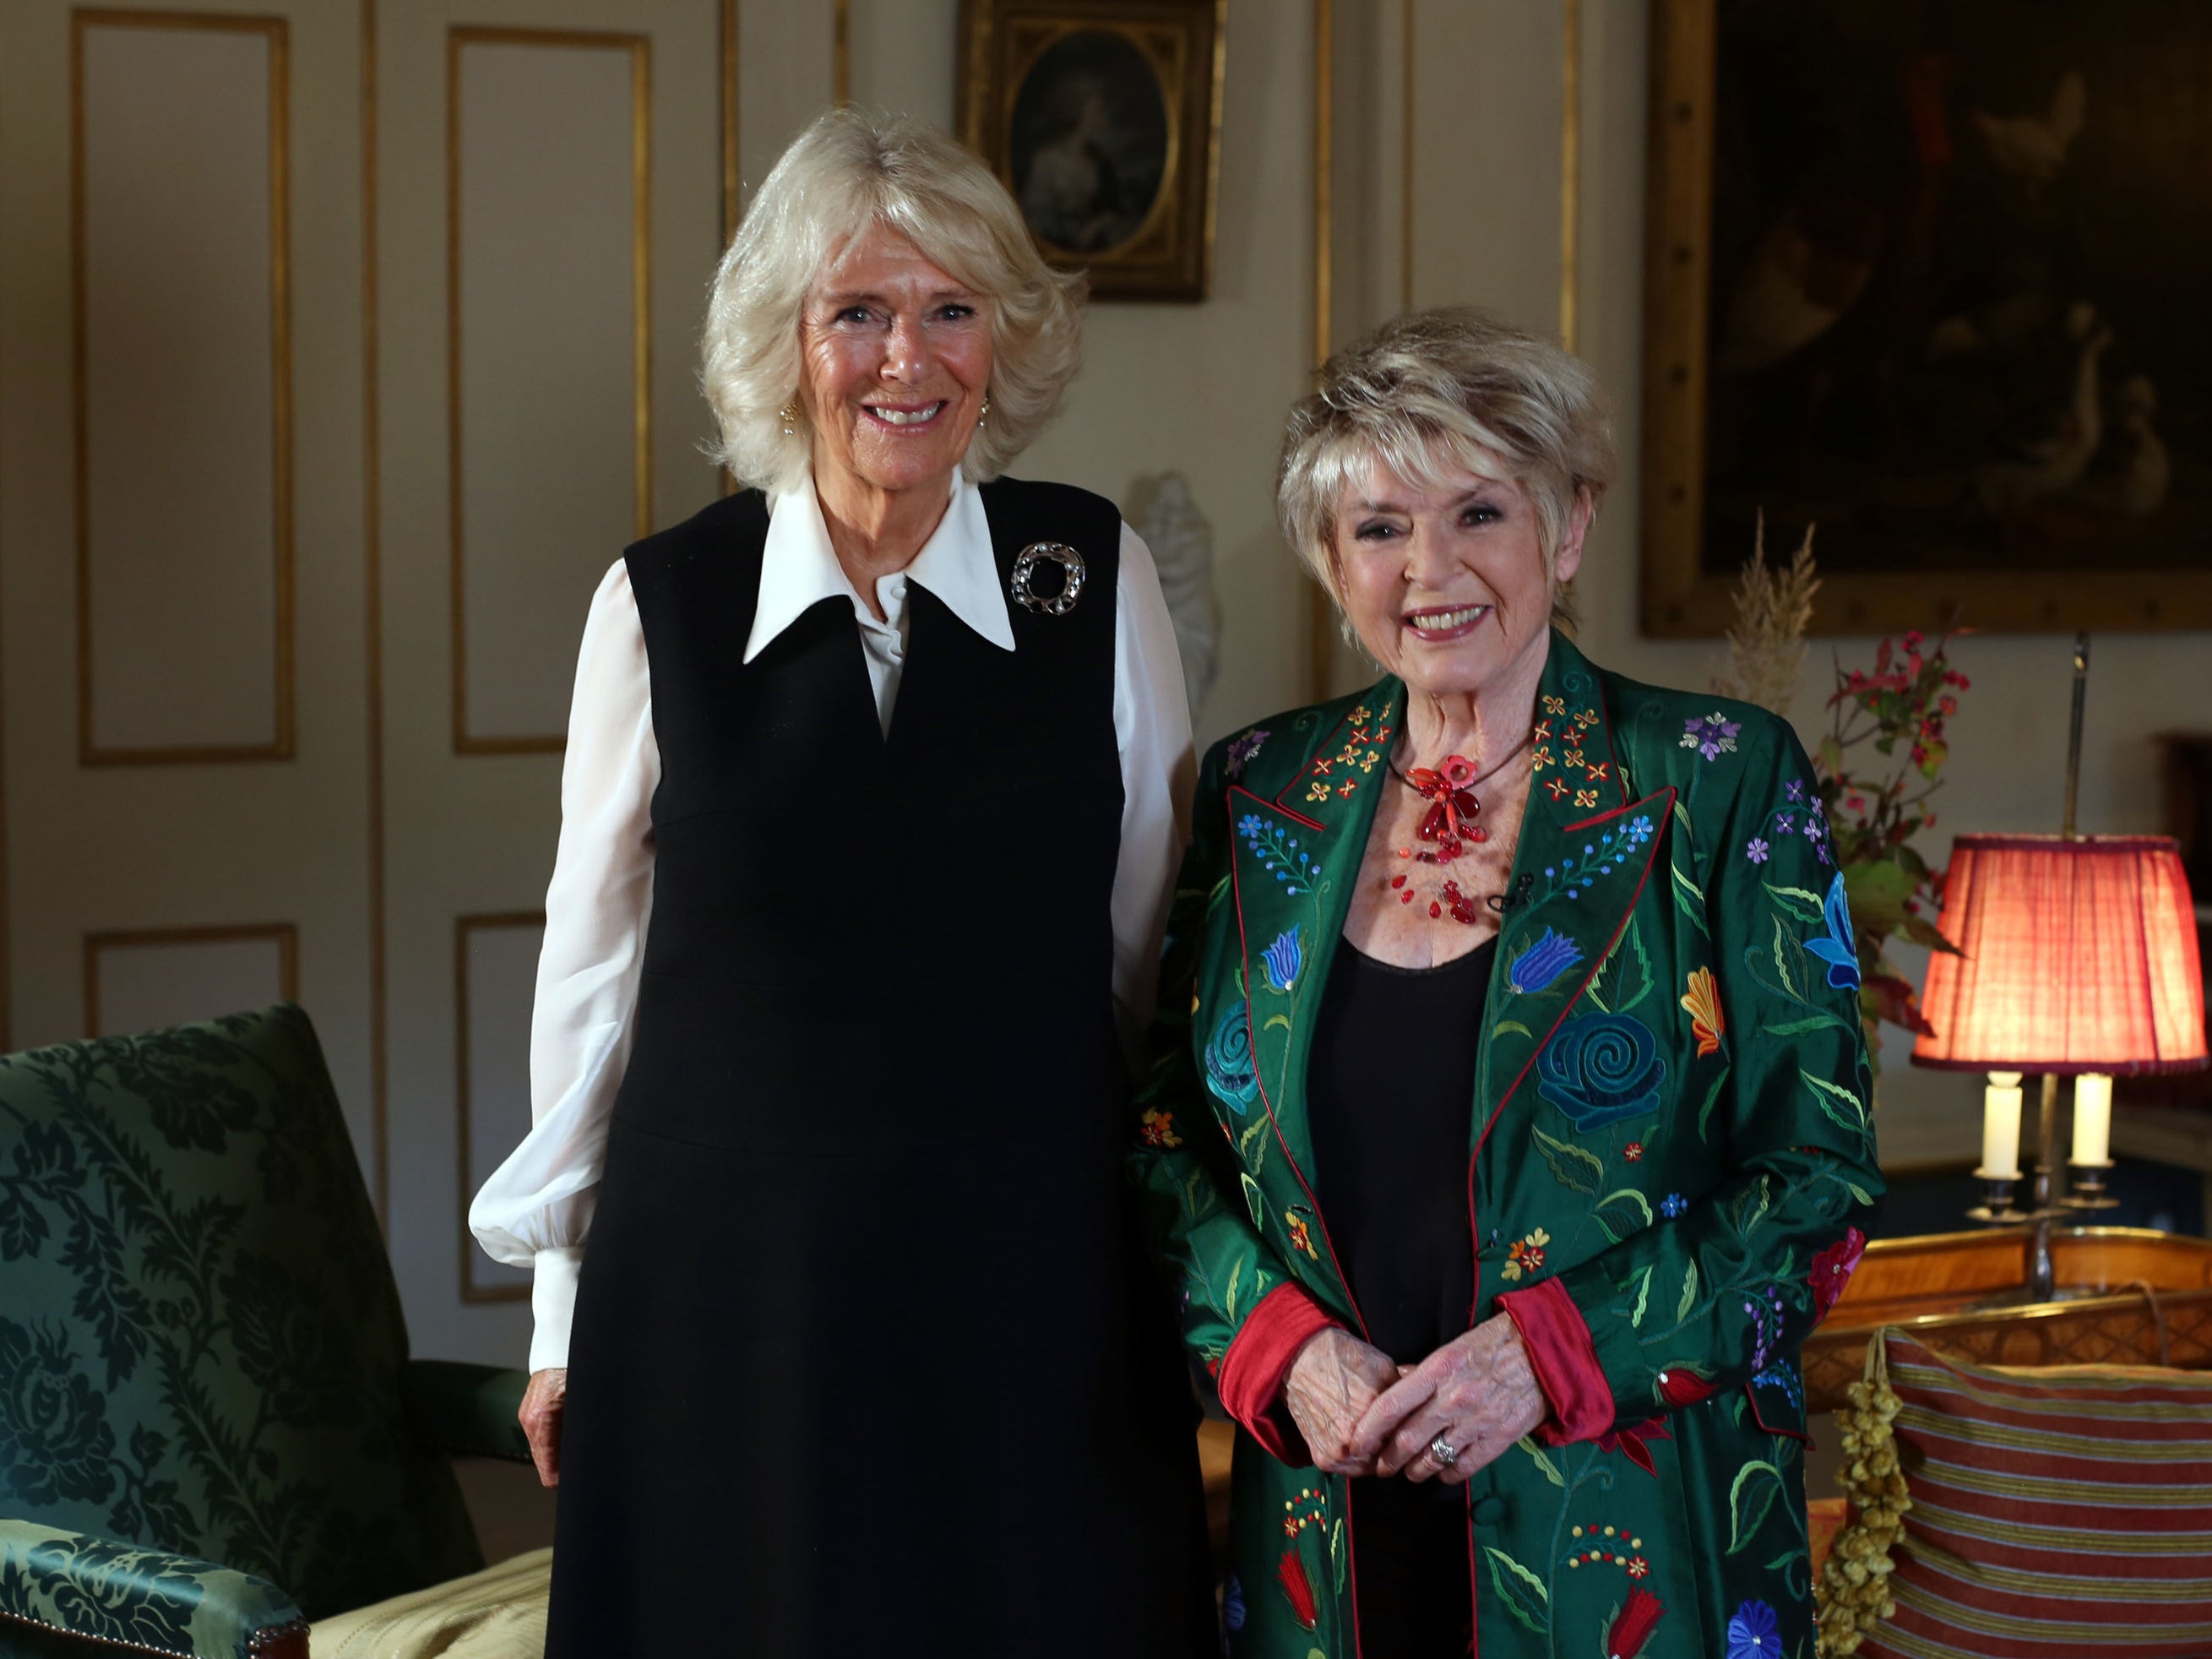 BBC handout photo of the Duchess of Cornwall (left) who was interviewed by Gloria Hunniford on Morning Live for the BBC to mark World Osteoporosis Day